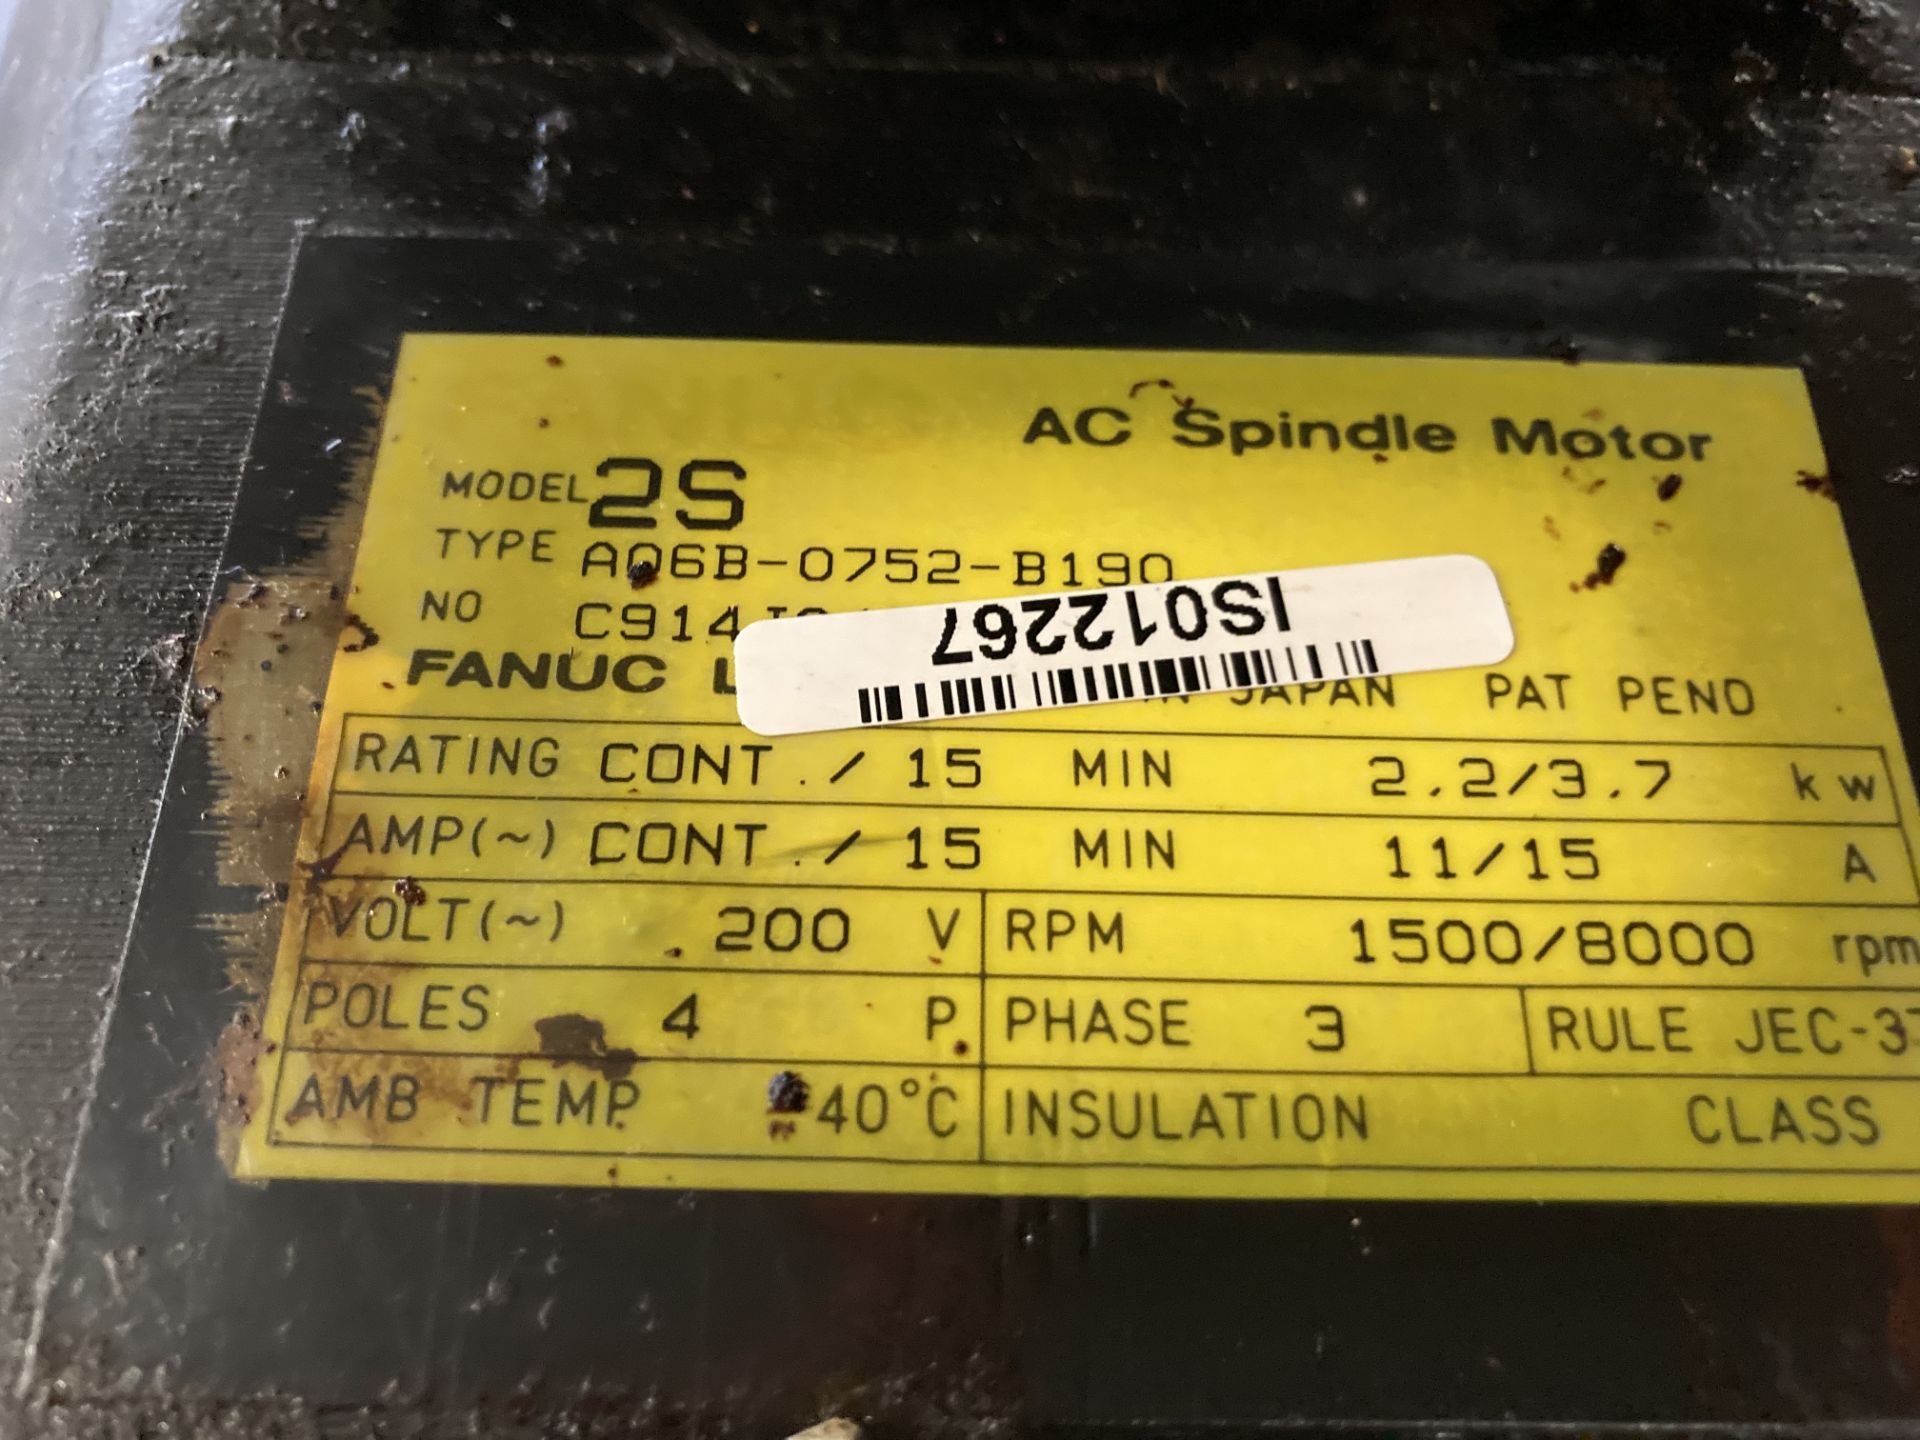 Fanuc AC Spindle Motor, M/N: 2S - Image 5 of 5